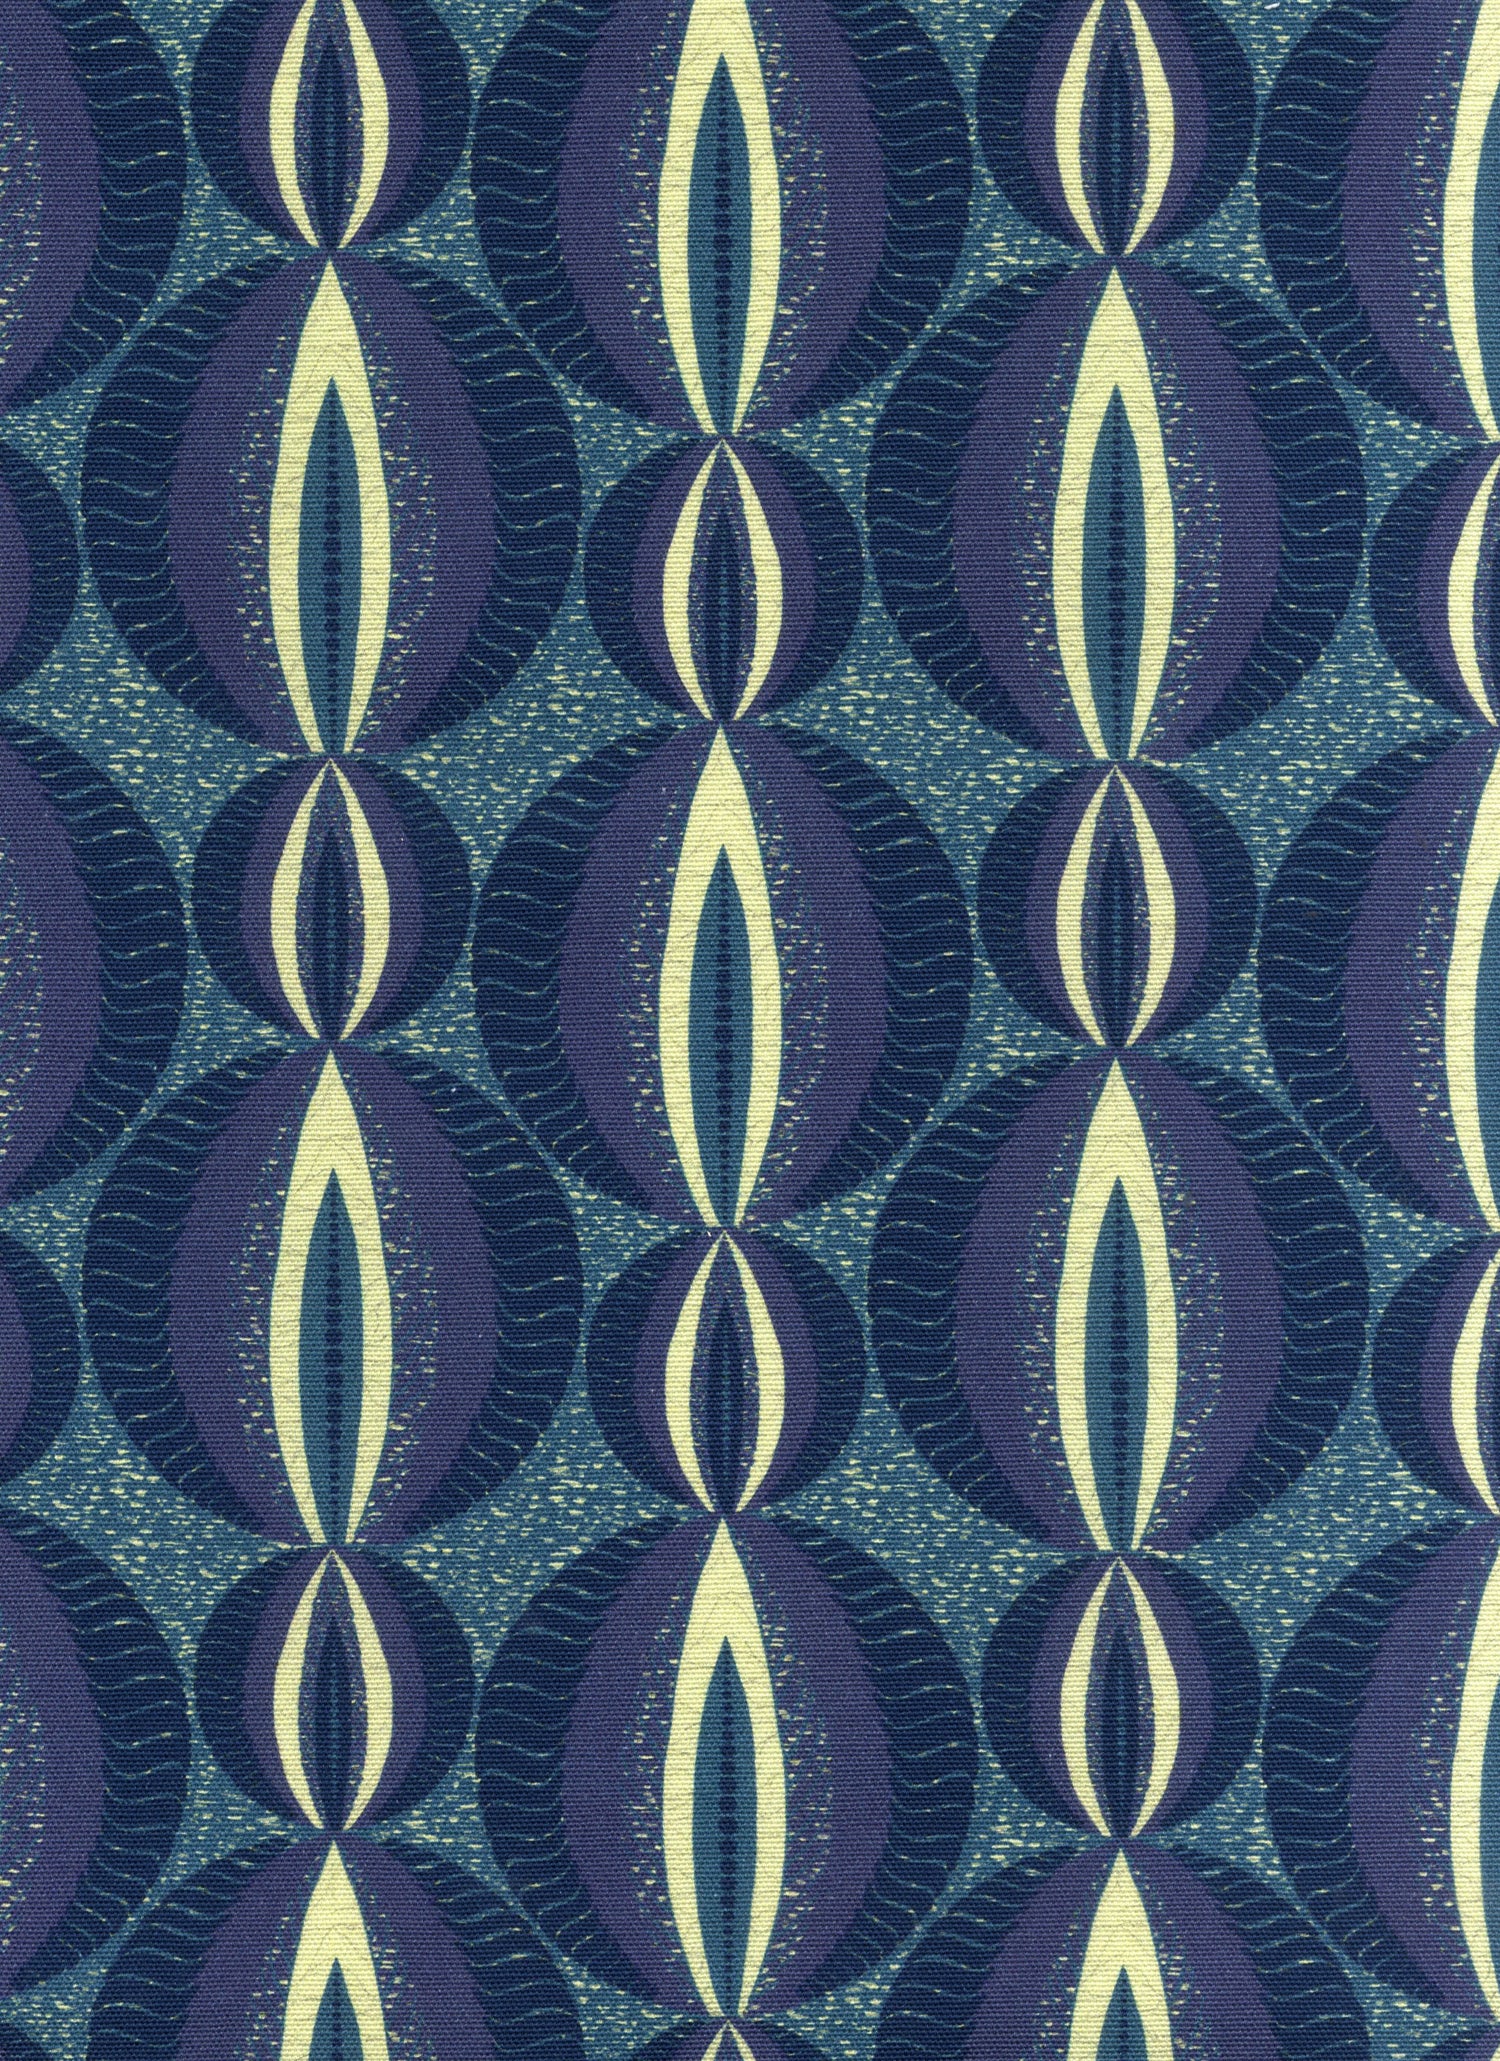 Detail of fabric in an interlocking circular stripe print in shades of navy and lime green on a navy field.